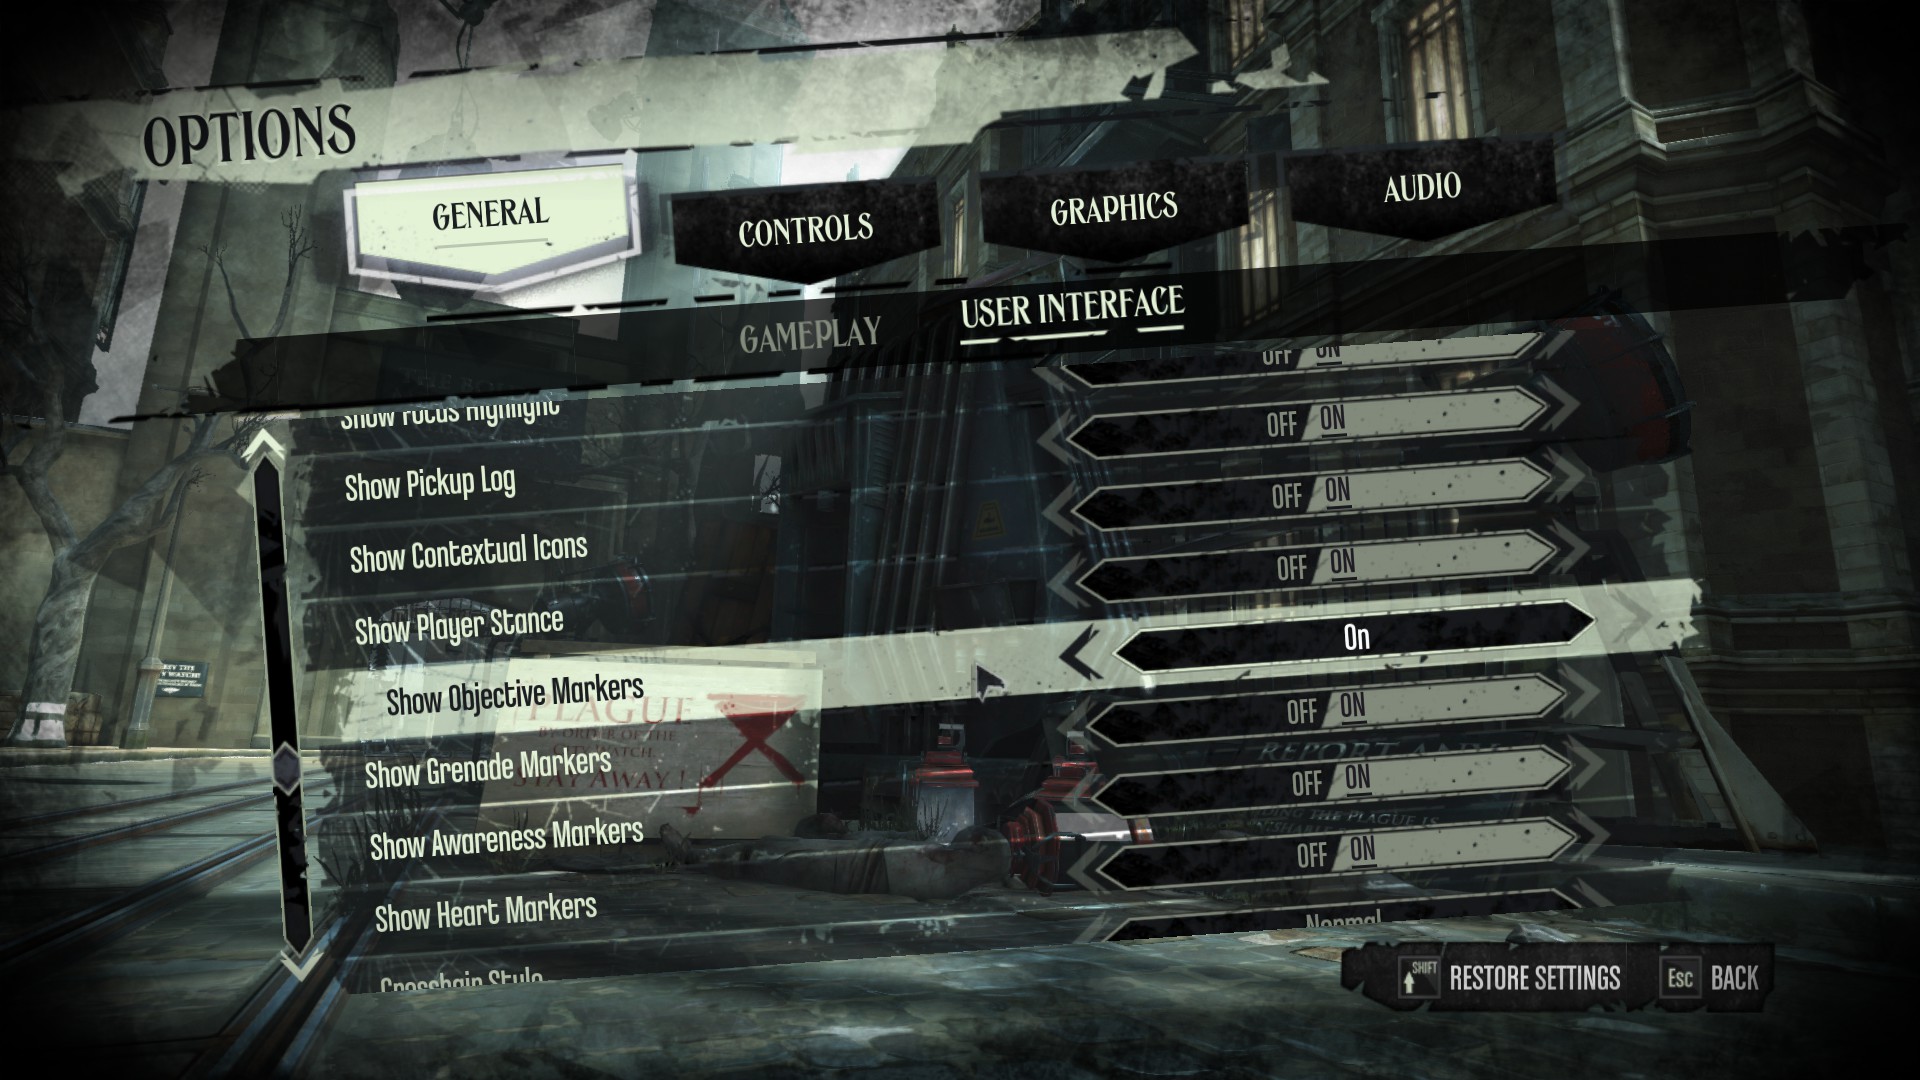 This game menu presents you with the ability to make the game's objectives harder or easier to find.